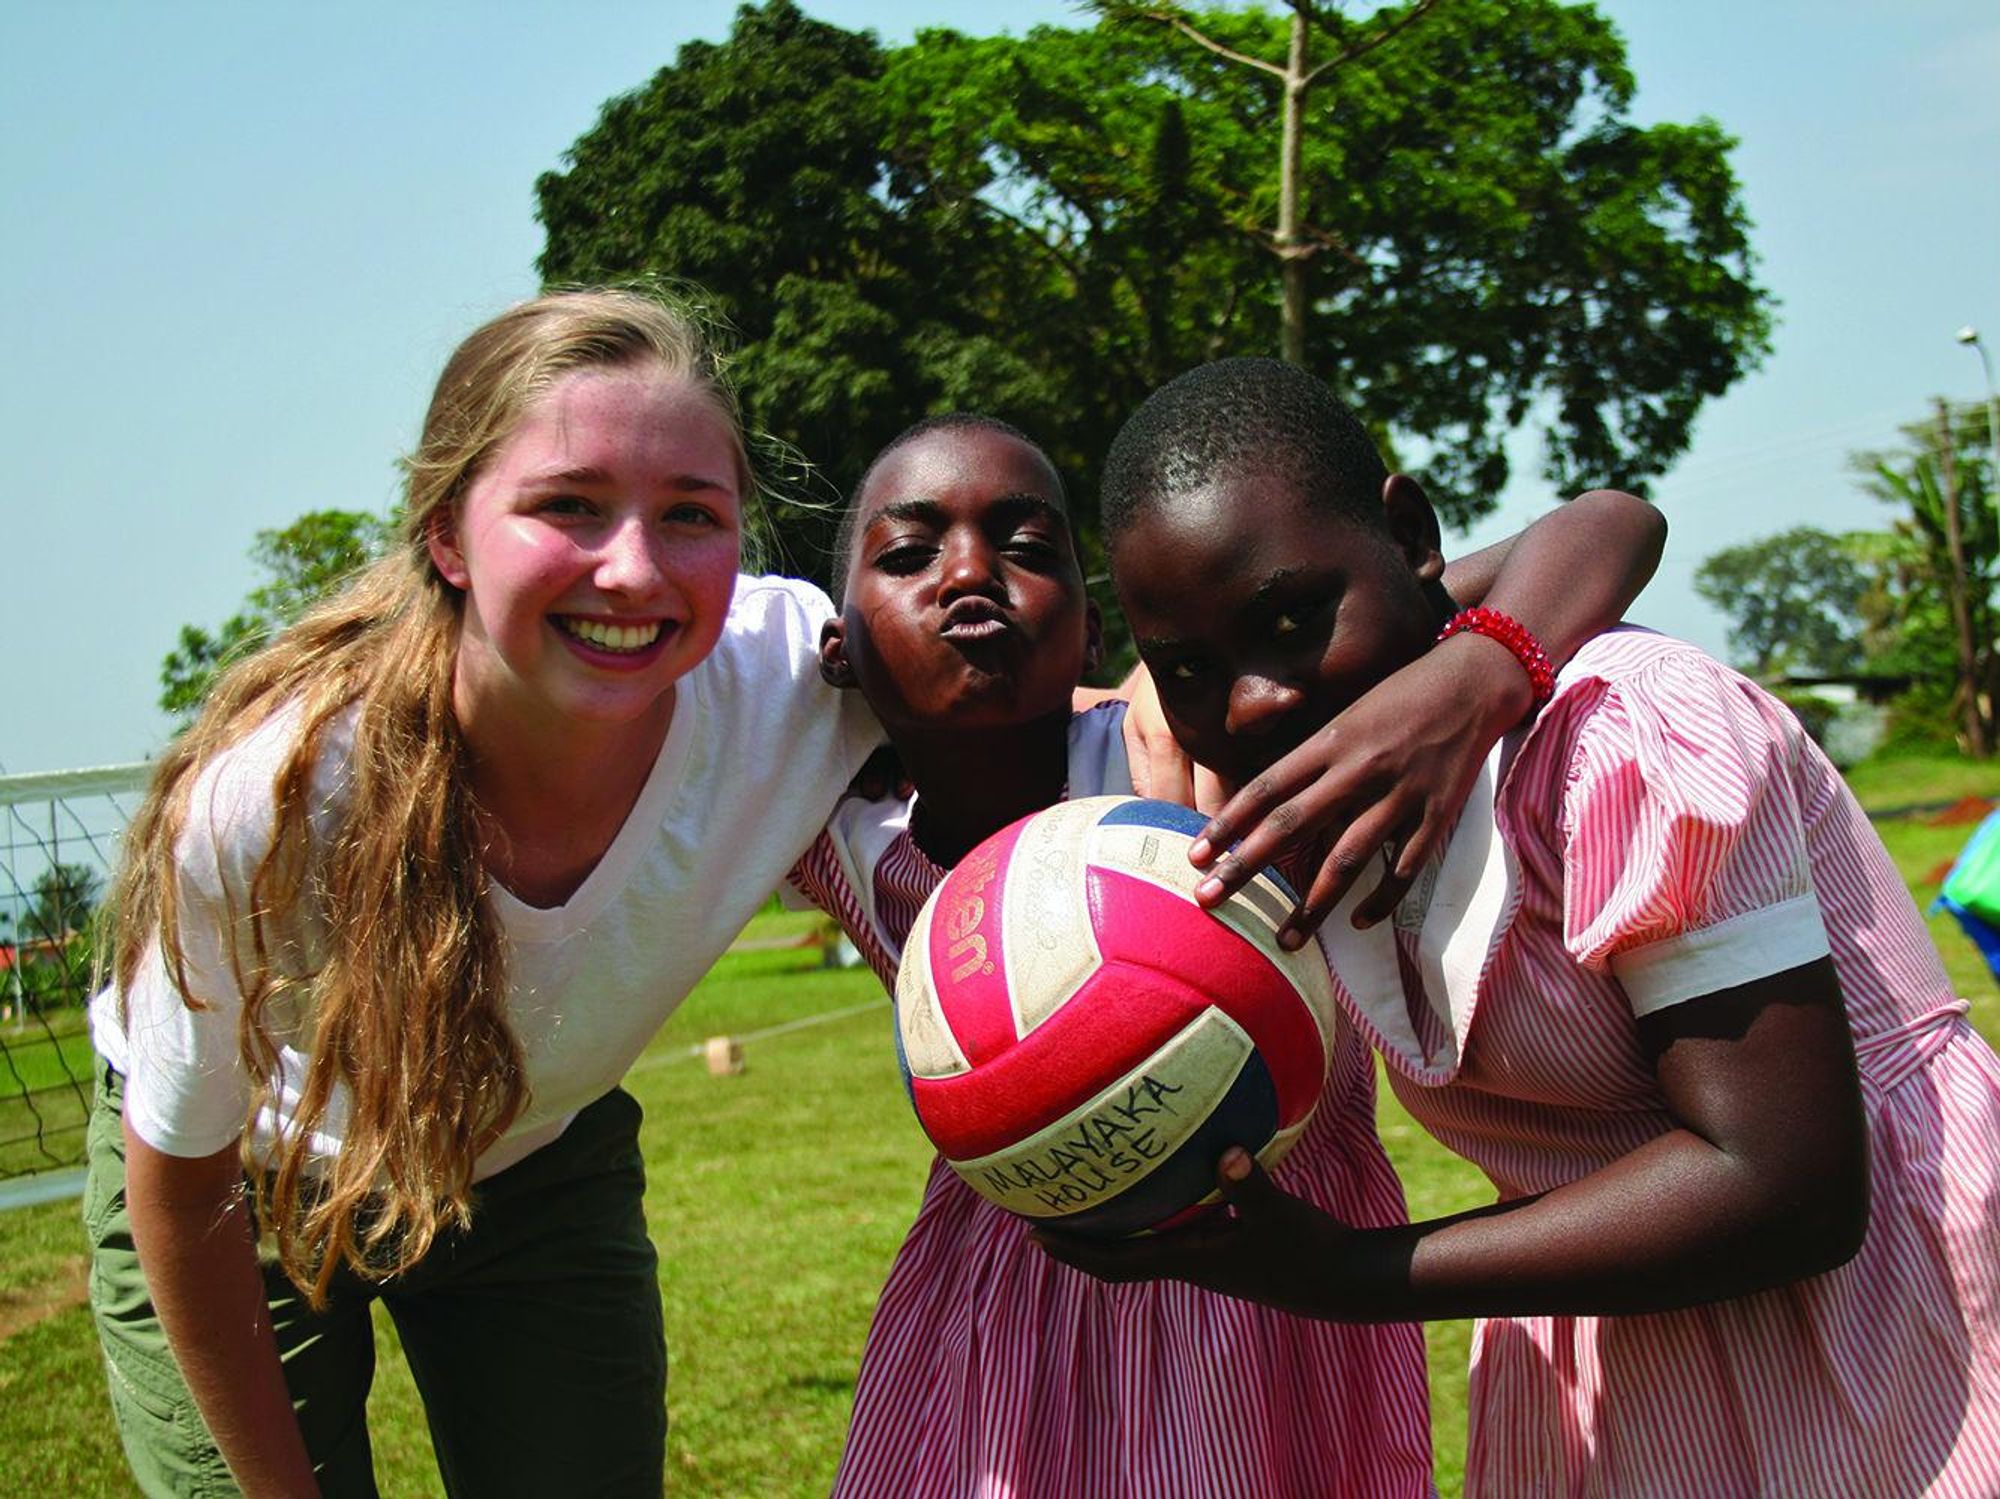 ESD junior Rainey Lynch traveled to Entebbe, Uganda to share her love of
volleyball with kids at the Malayaka House orphanage.